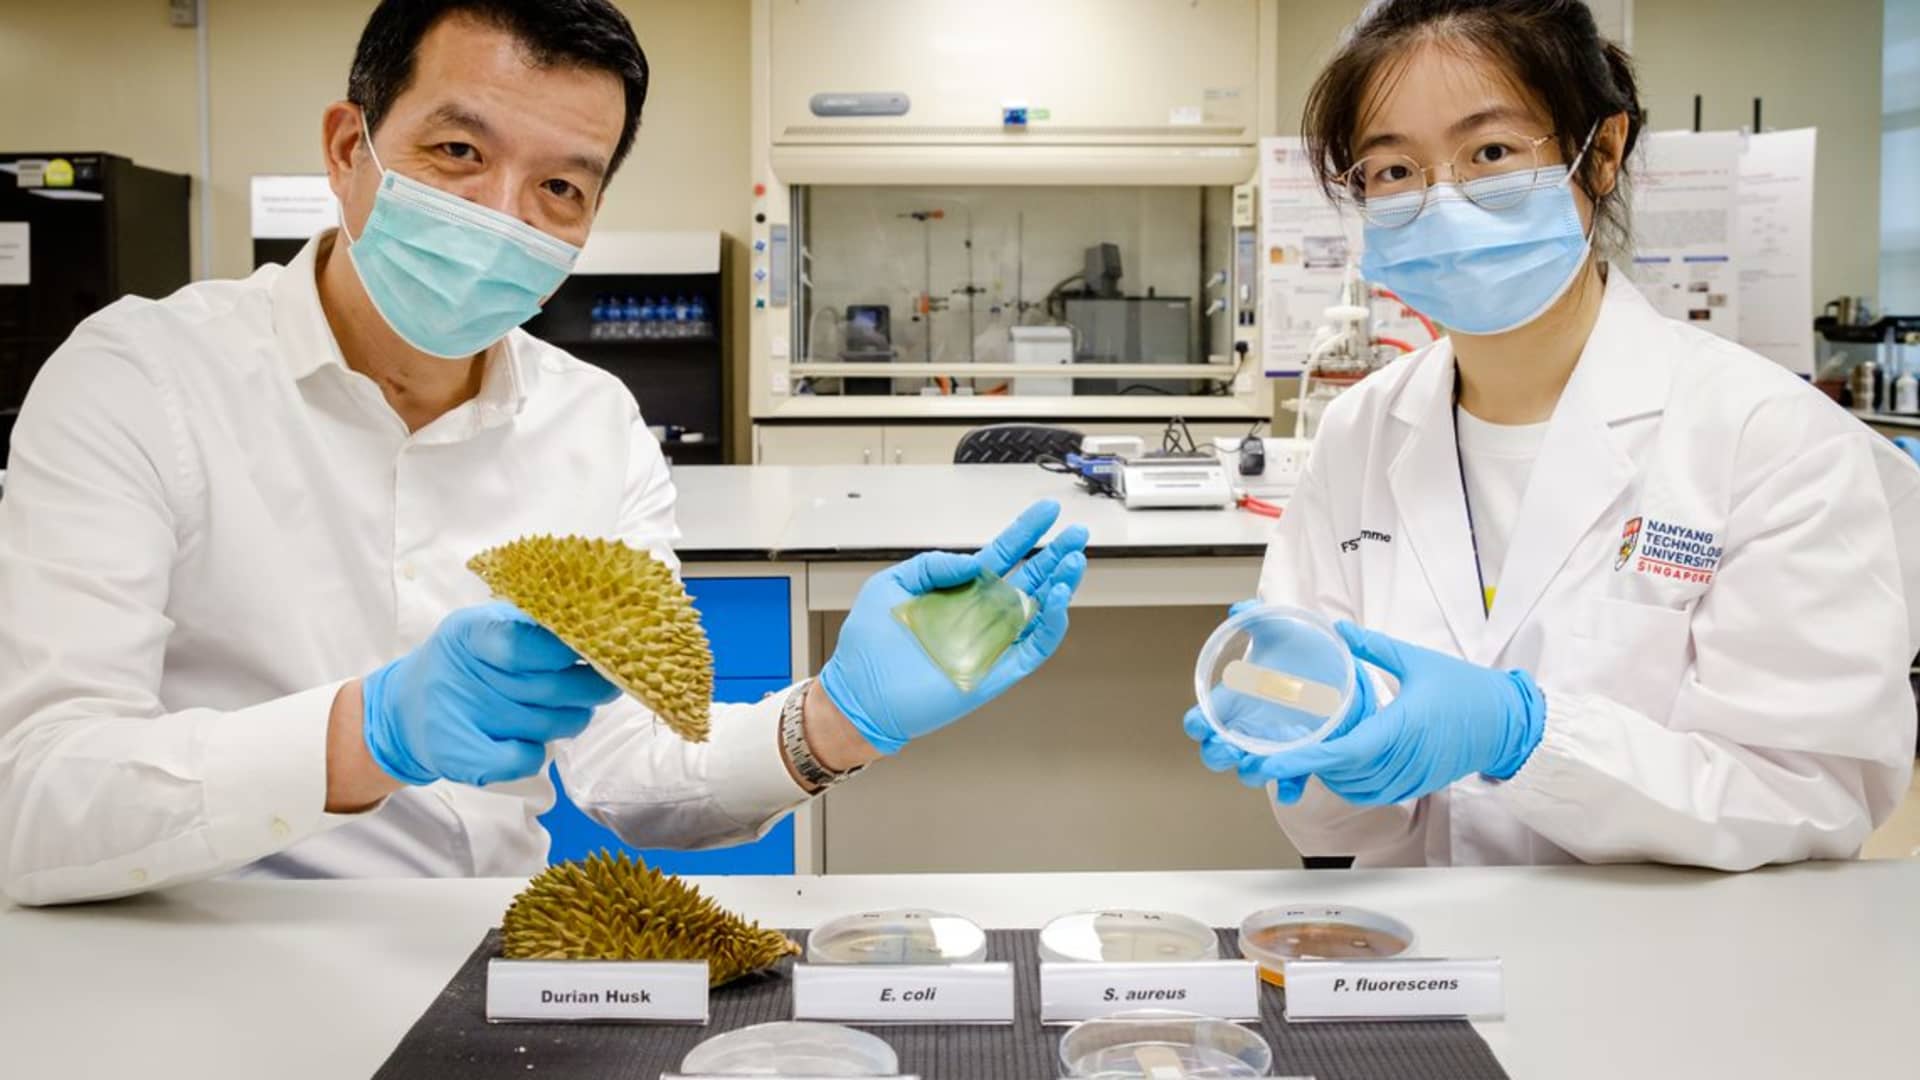 Professor William Chen and a member of his team experiment on durian husks.